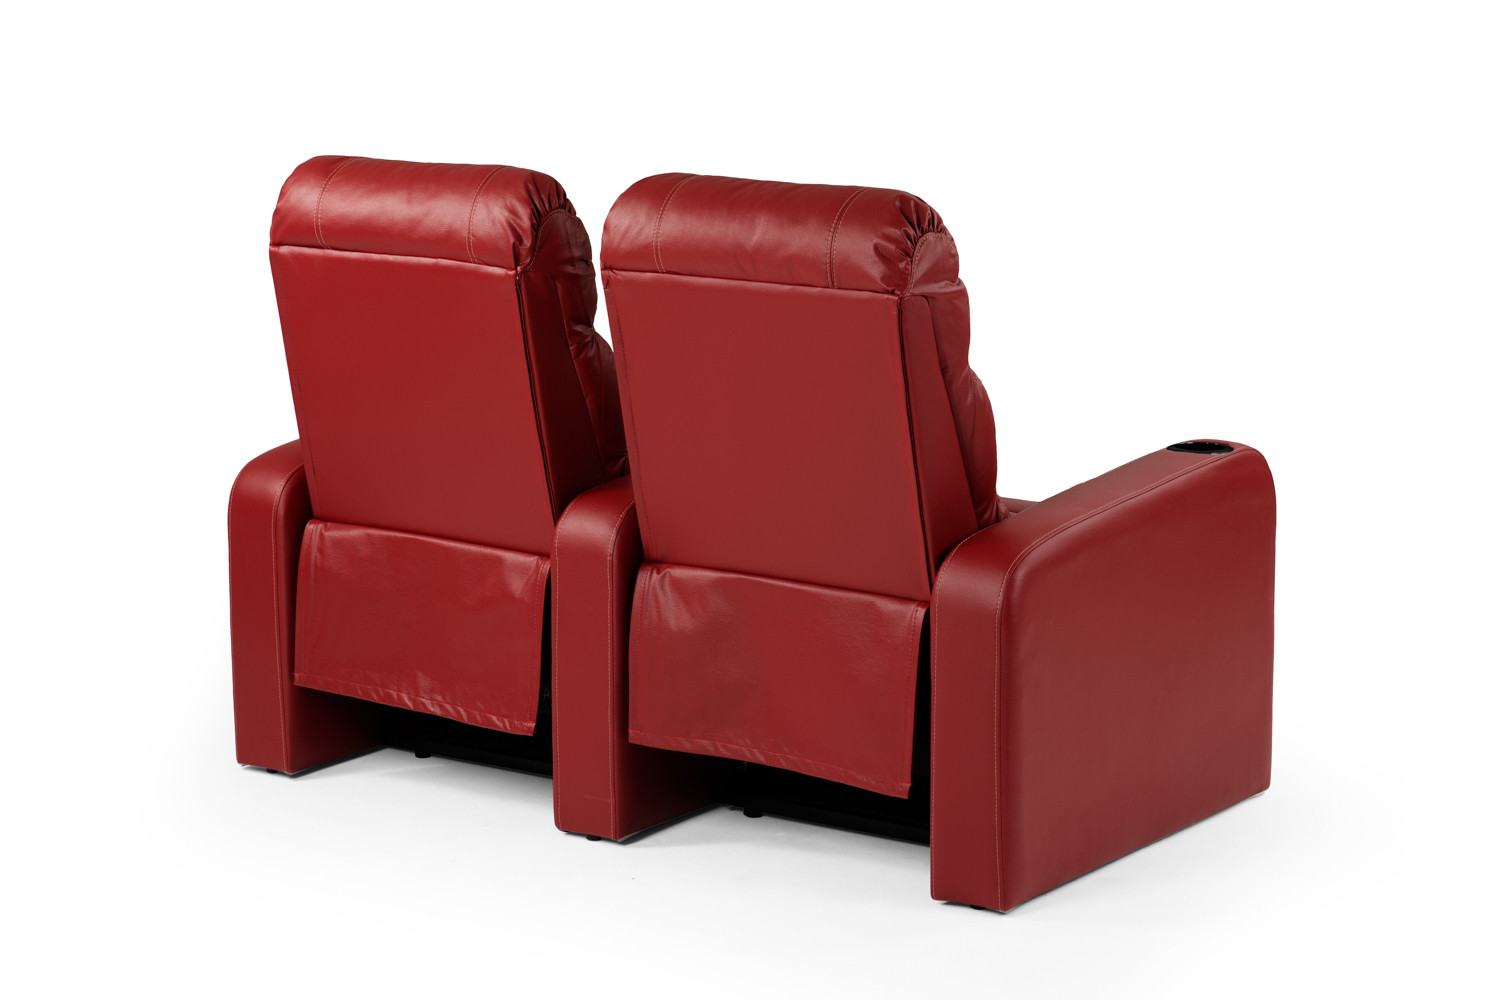 Cinema Pro 2 Seater Recliner - Red Recliner Couches - 9